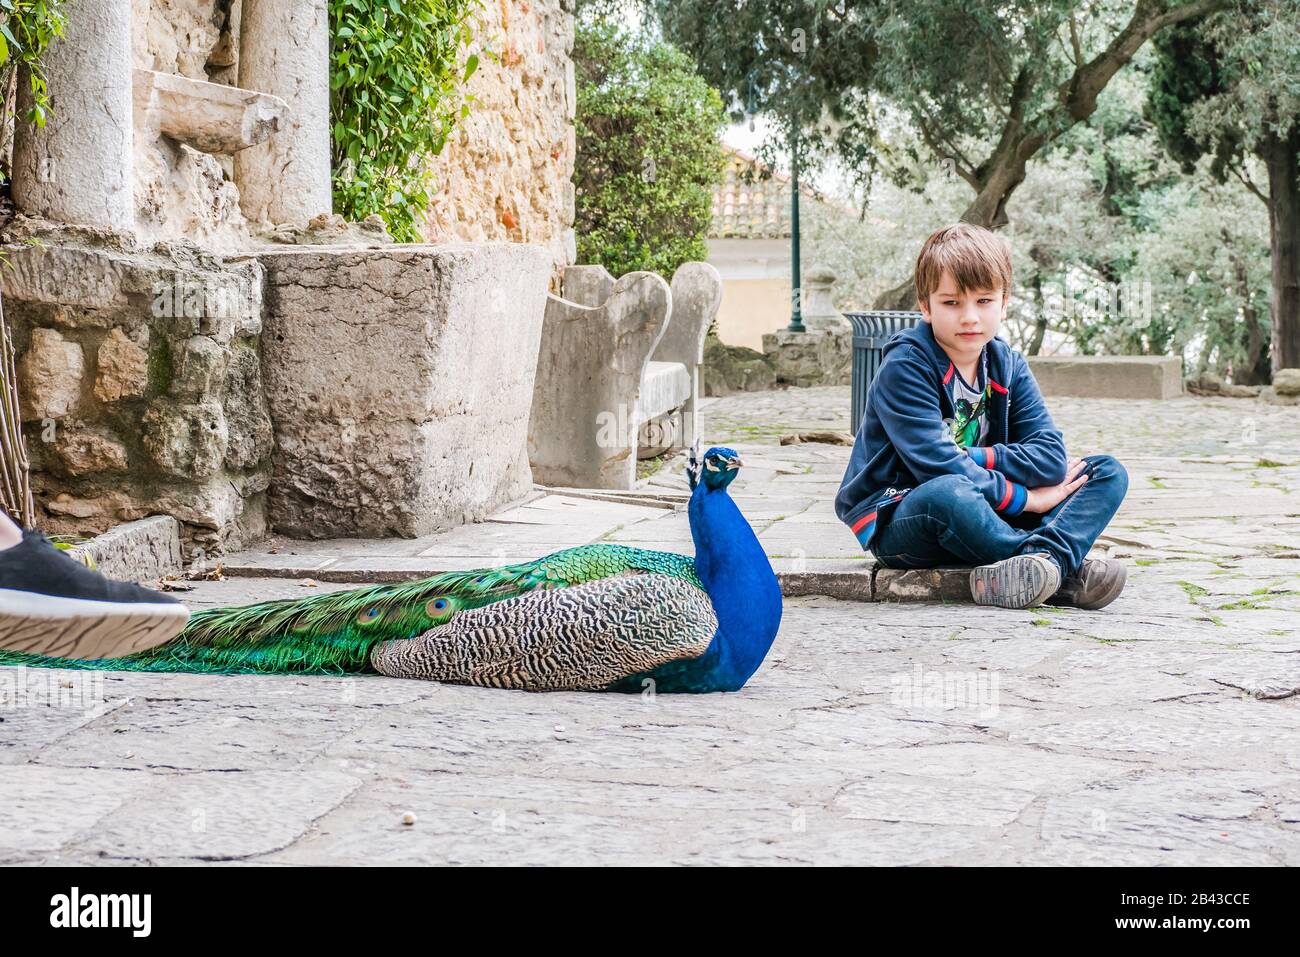 a young boy sitting next to a peacock laying on the ground Stock Photo